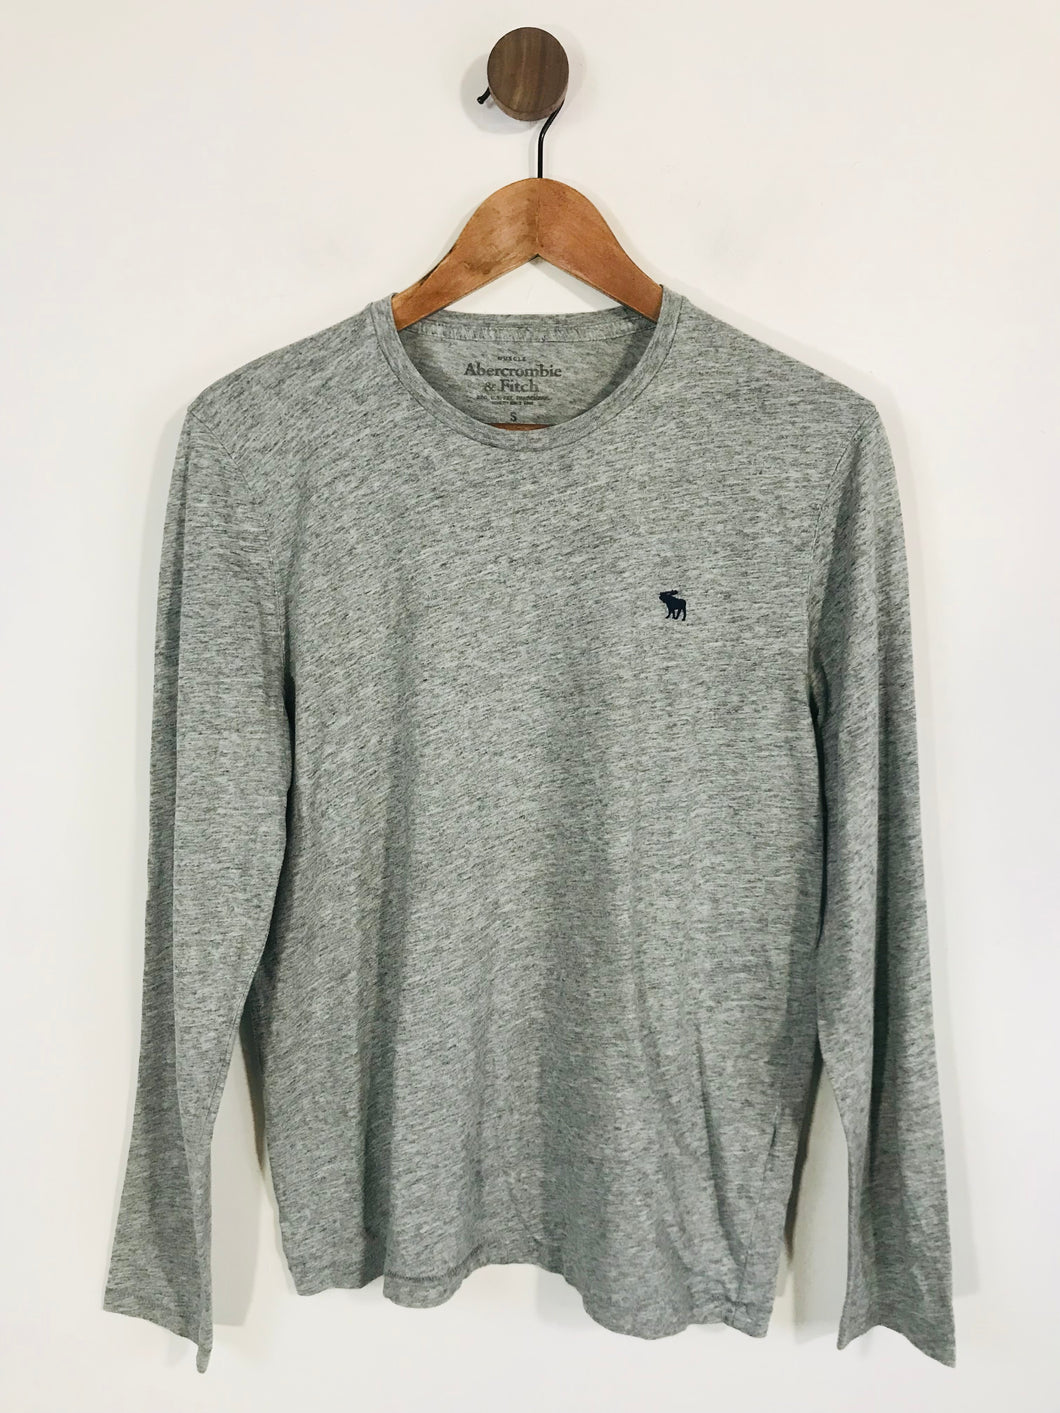 Abercrombie & Fitch Men's Long Sleeve T-Shirt | S | Grey